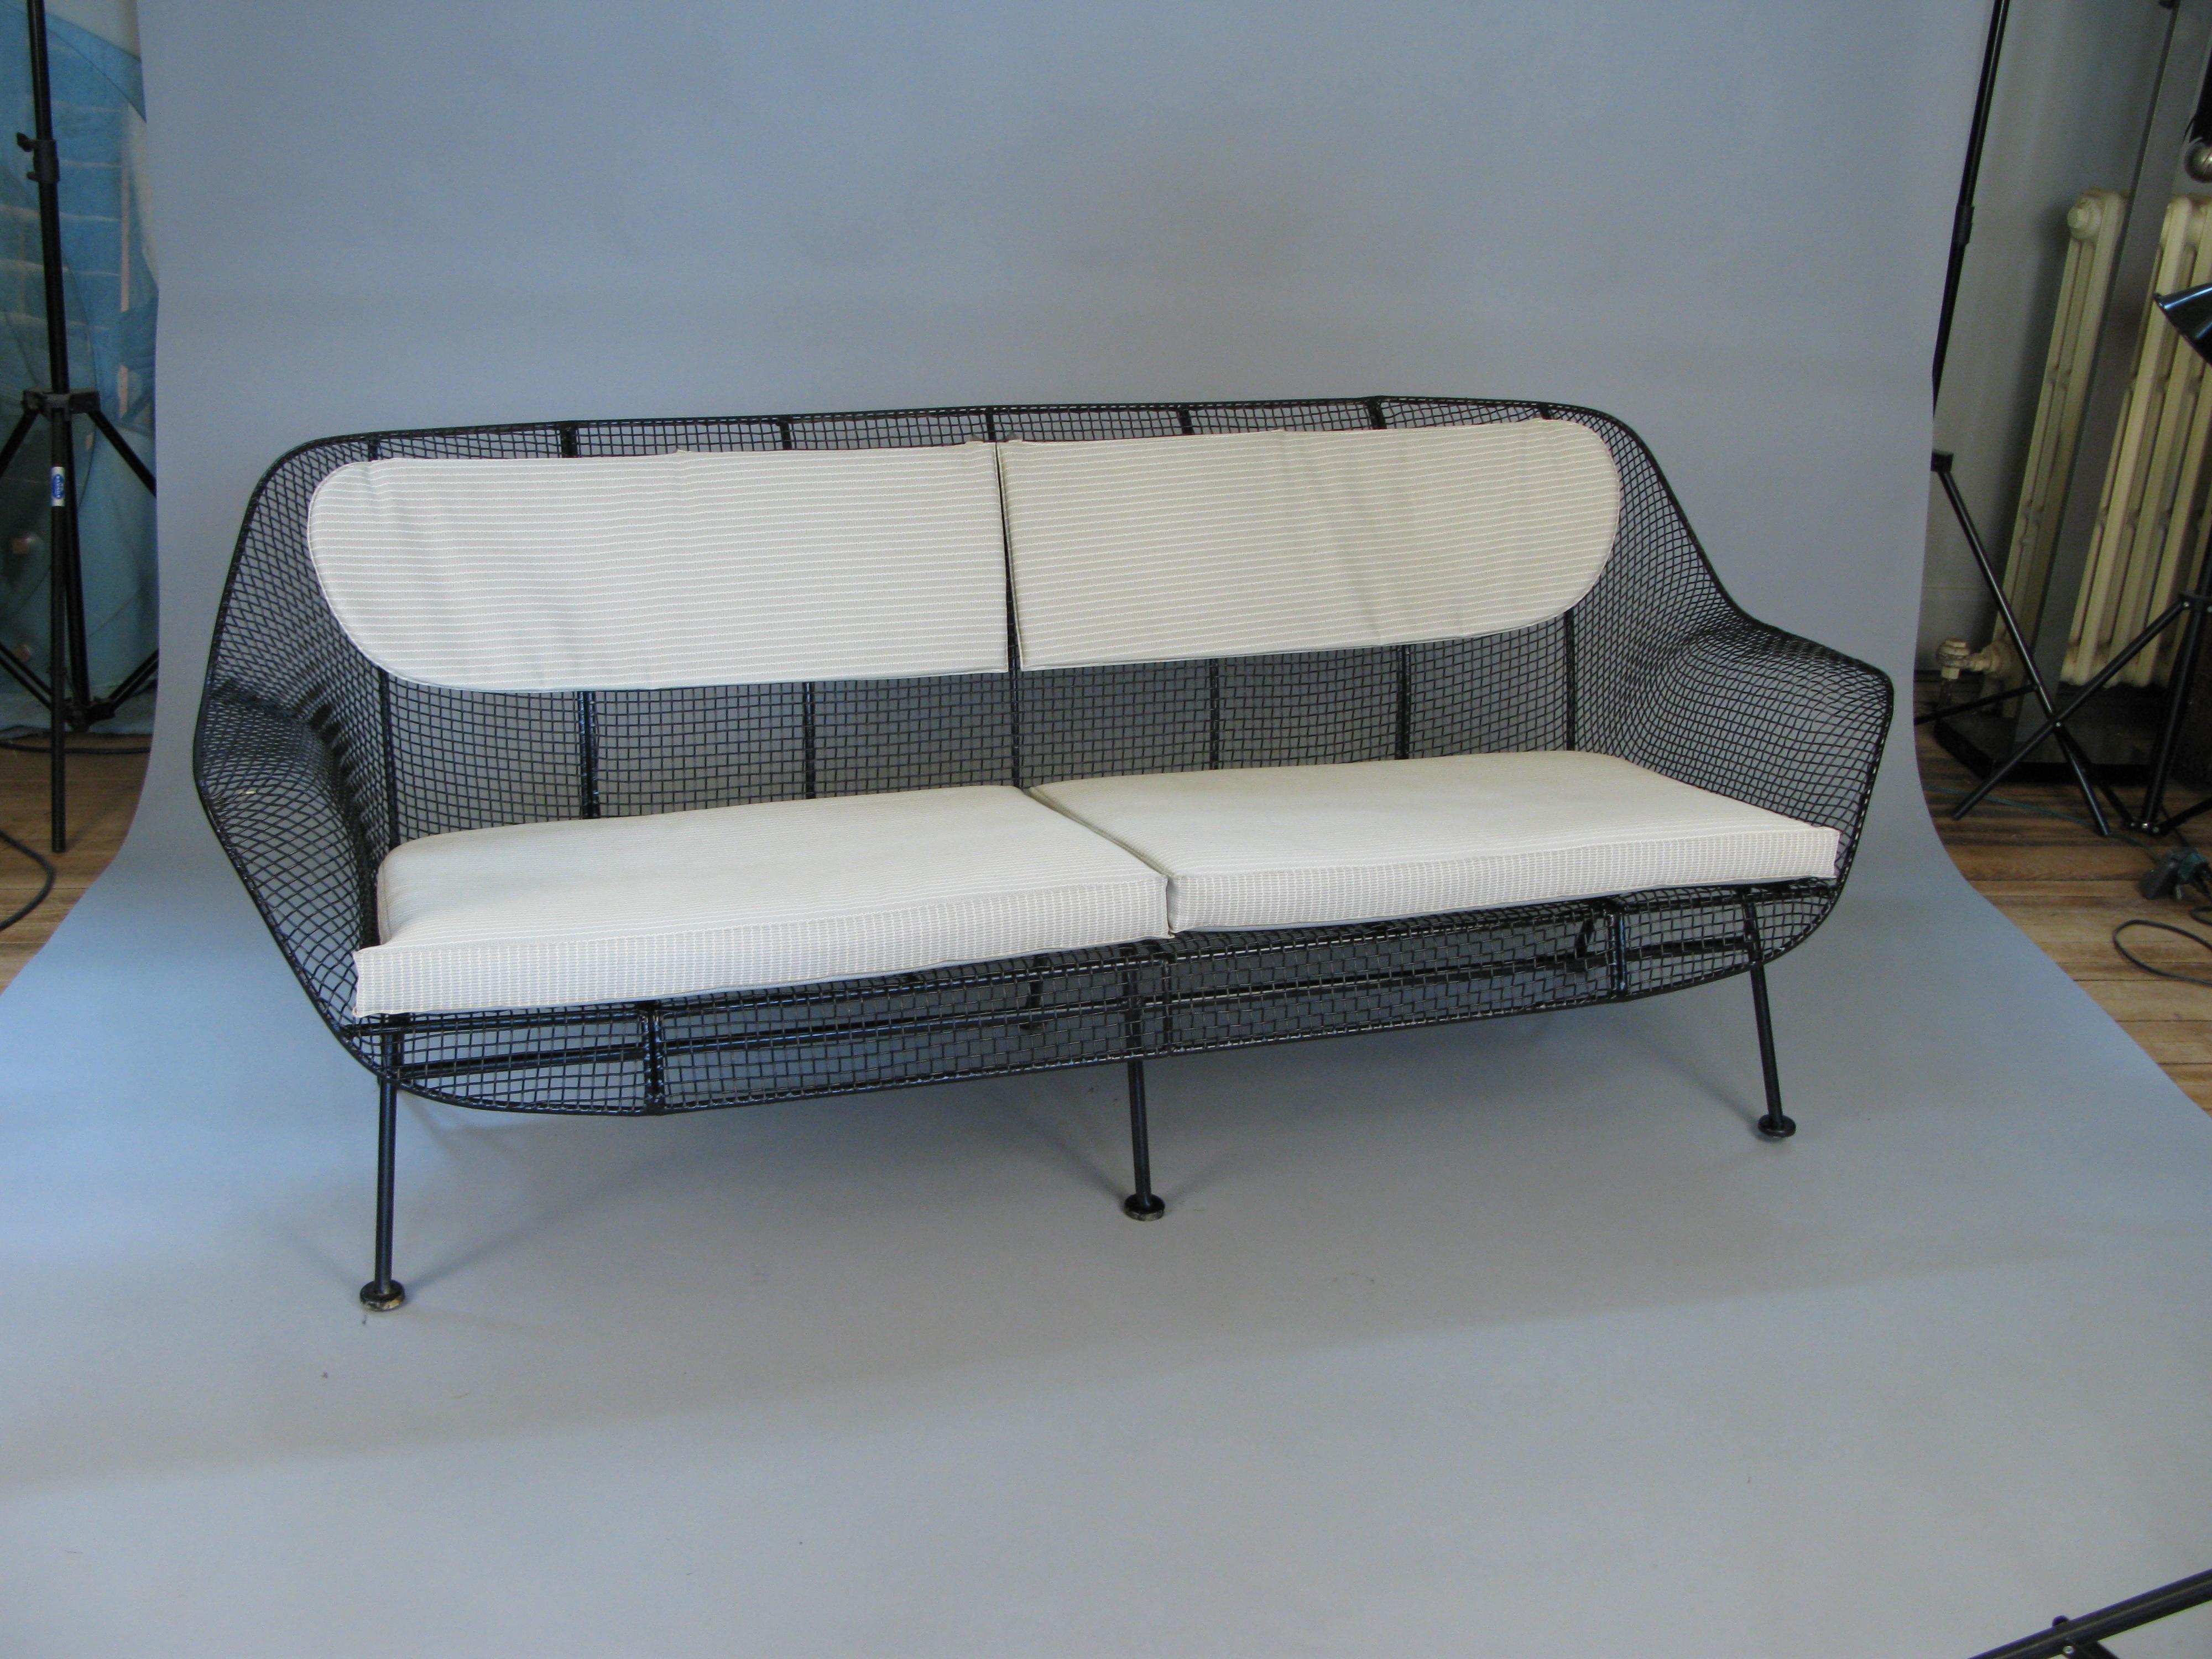 custom cushion sets (seat and back) for the woodard sculptura settee and the woodard sofa, in sunbrella white 57003-0000. to be delivered with the pieces.
(images are of vintage cushions - color pictured is not indicative of sunbrella white